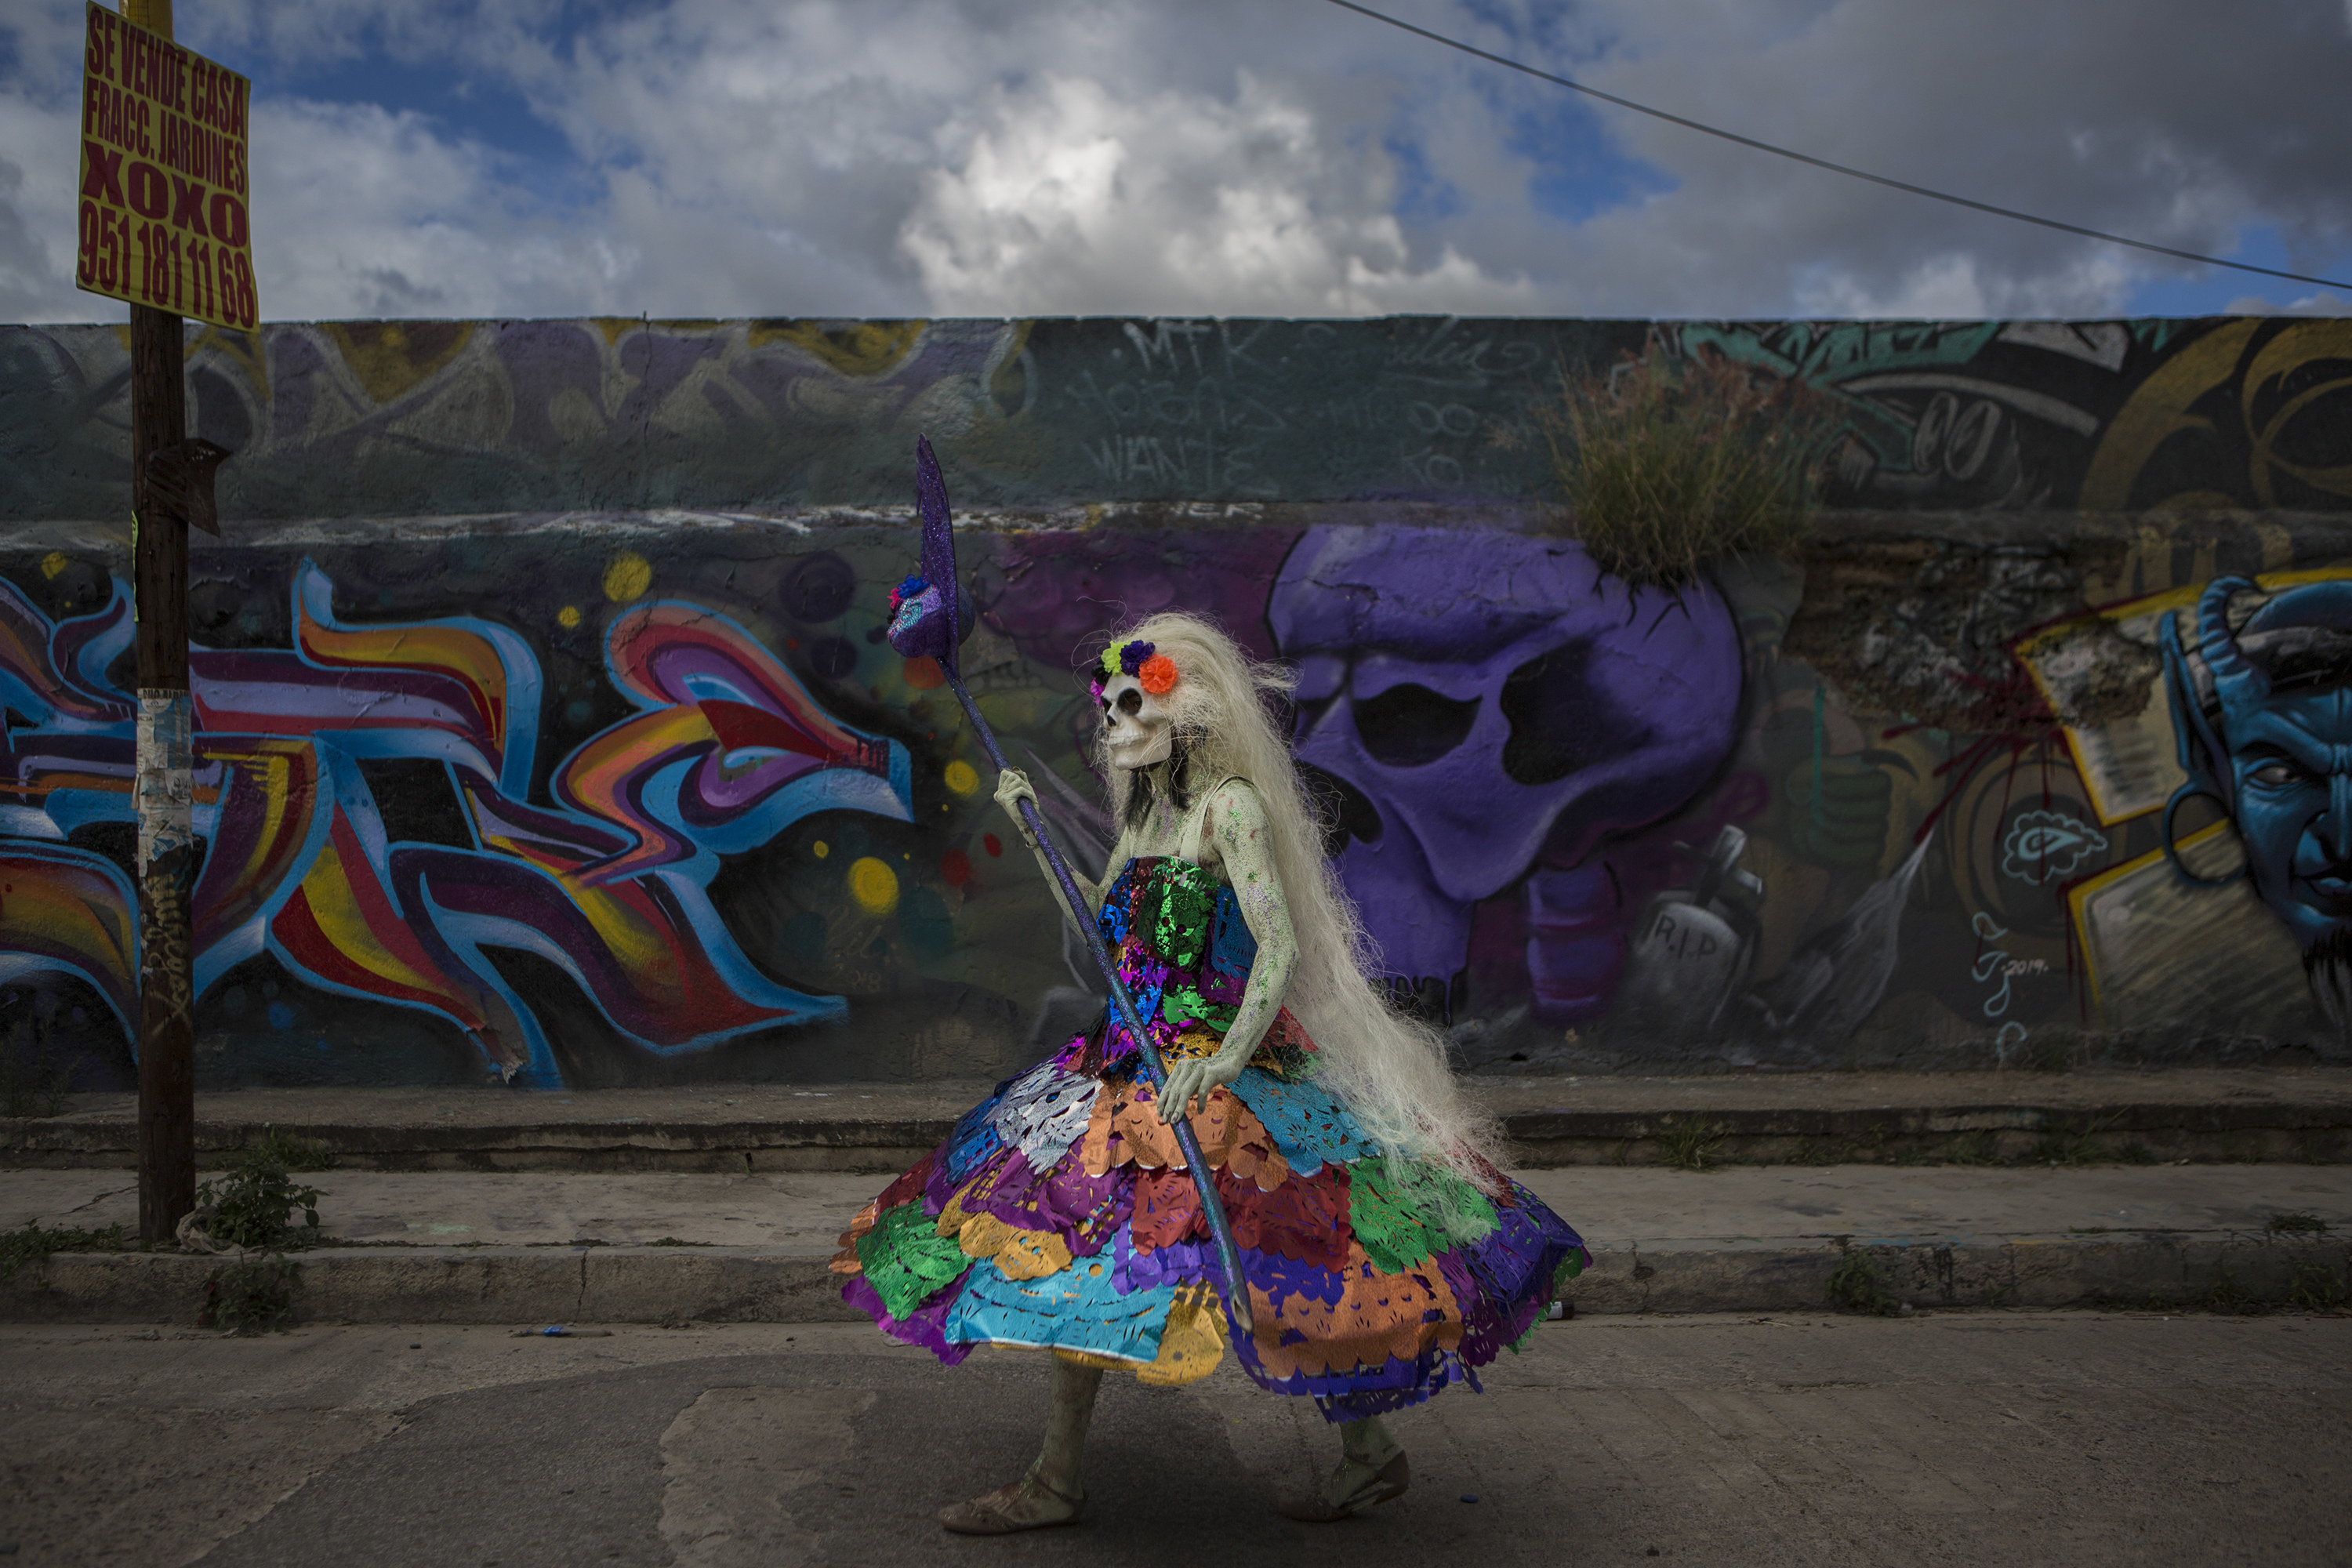 A person wearing a colorful dress, long white wig, and skull face paint walks in front of a wall with graffiti